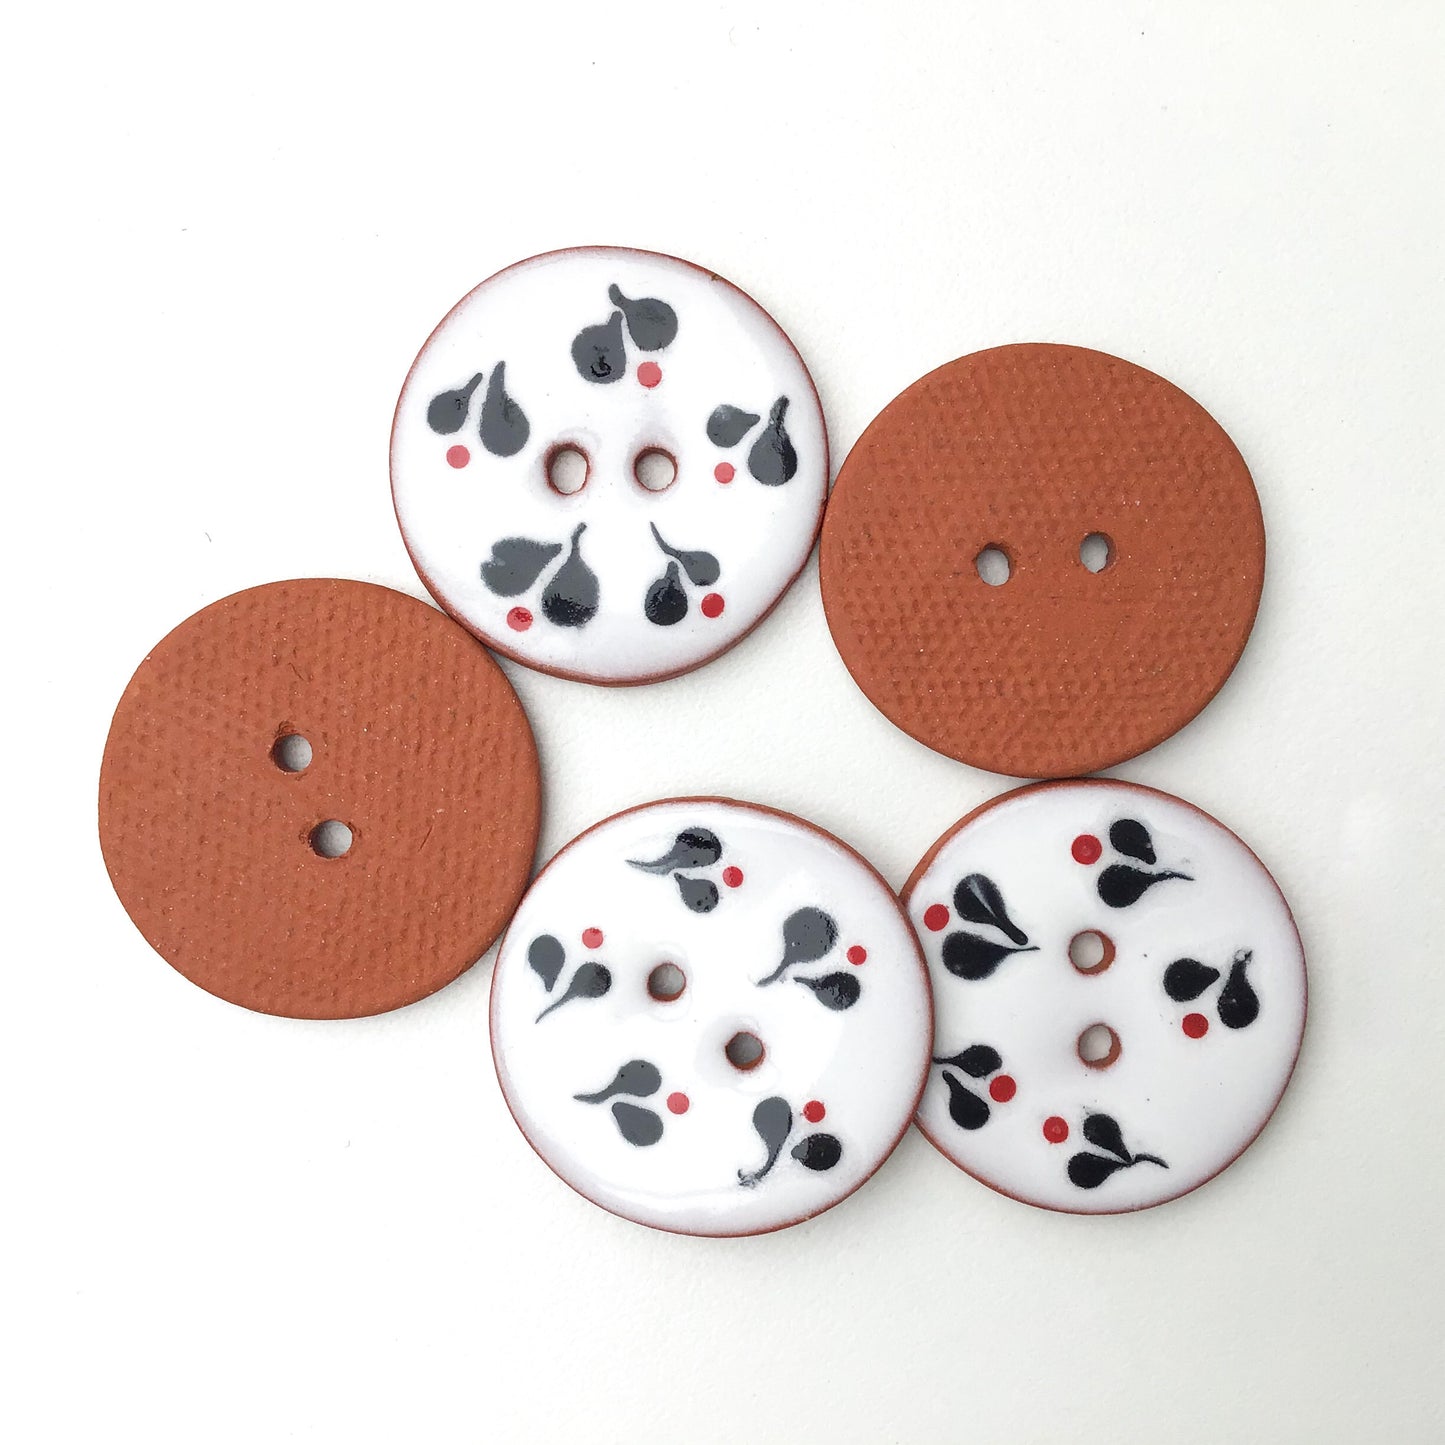 Decorative Ceramic Button with Small Floral Print - Red - Black - White Clay Buttons - 1 1/16" (ws-66)